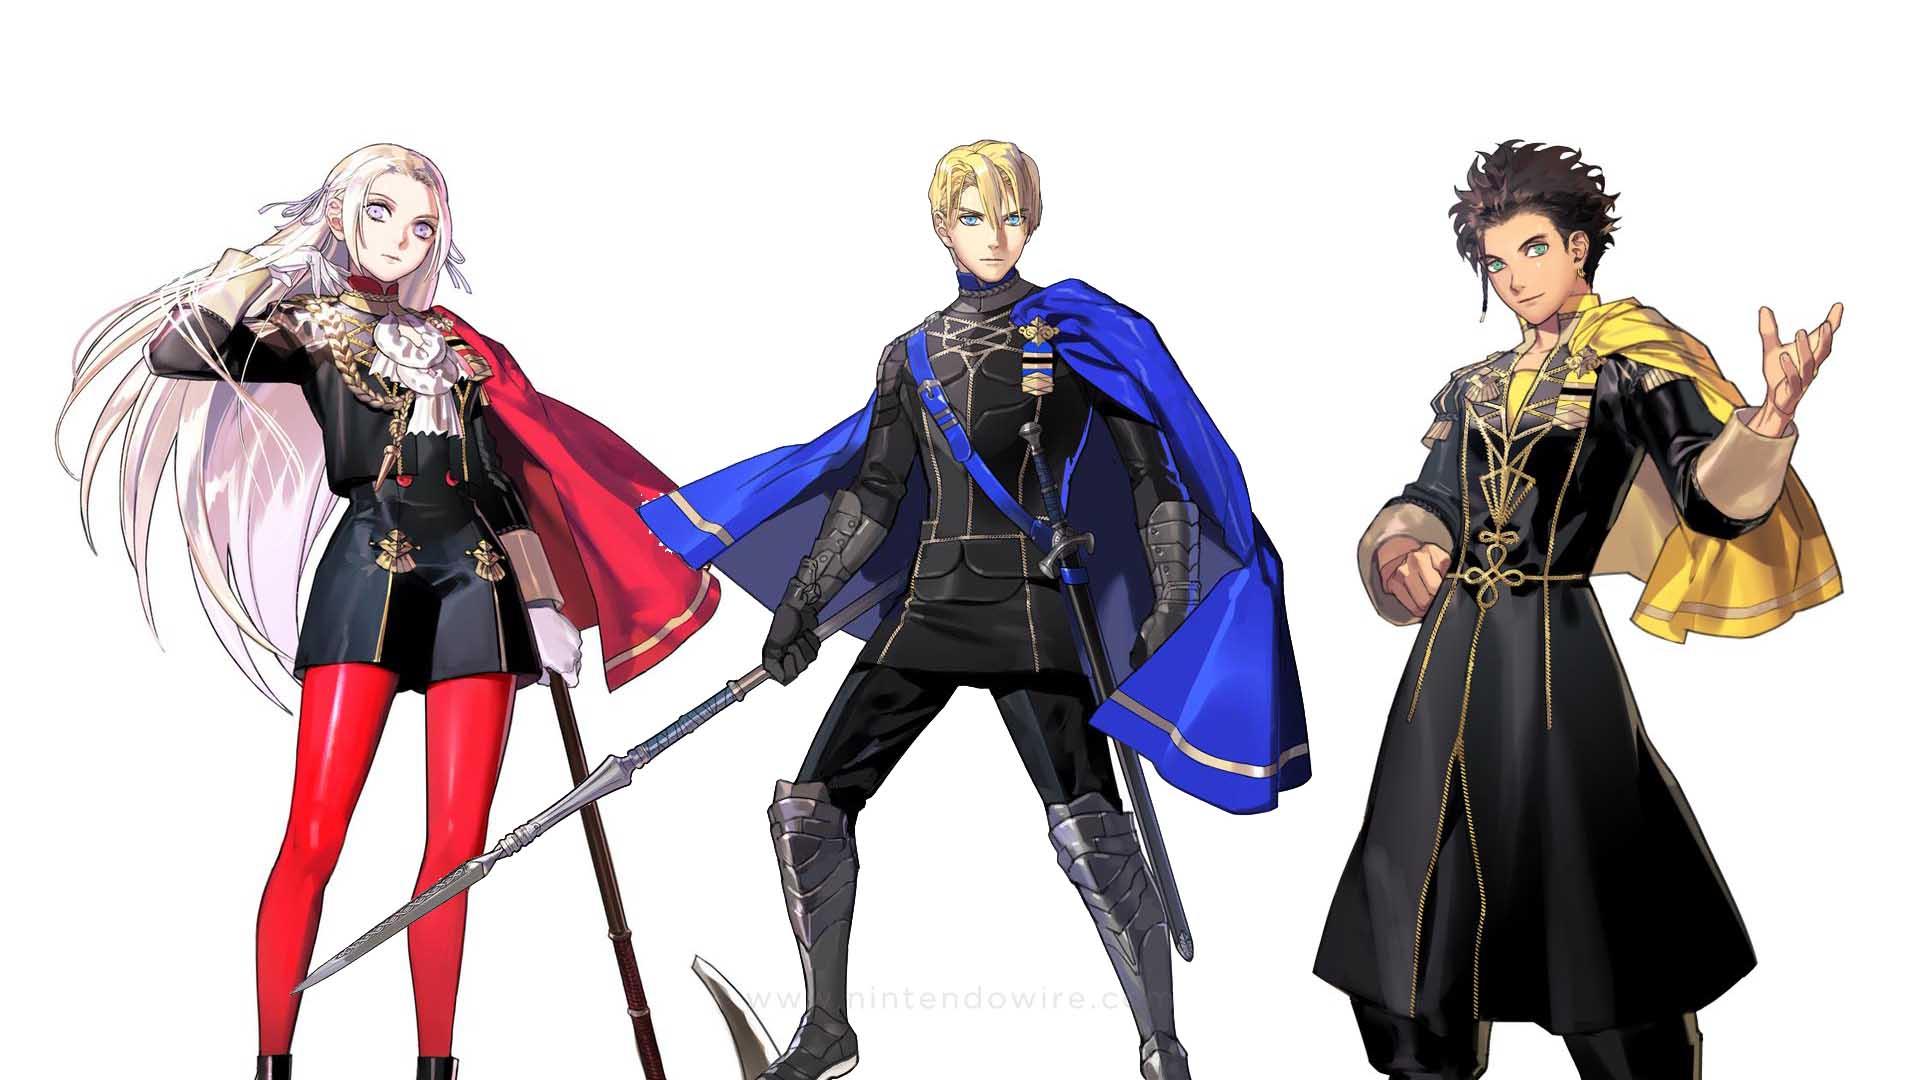 Fire Emblem: Three Houses introduces its core cast of heirs.